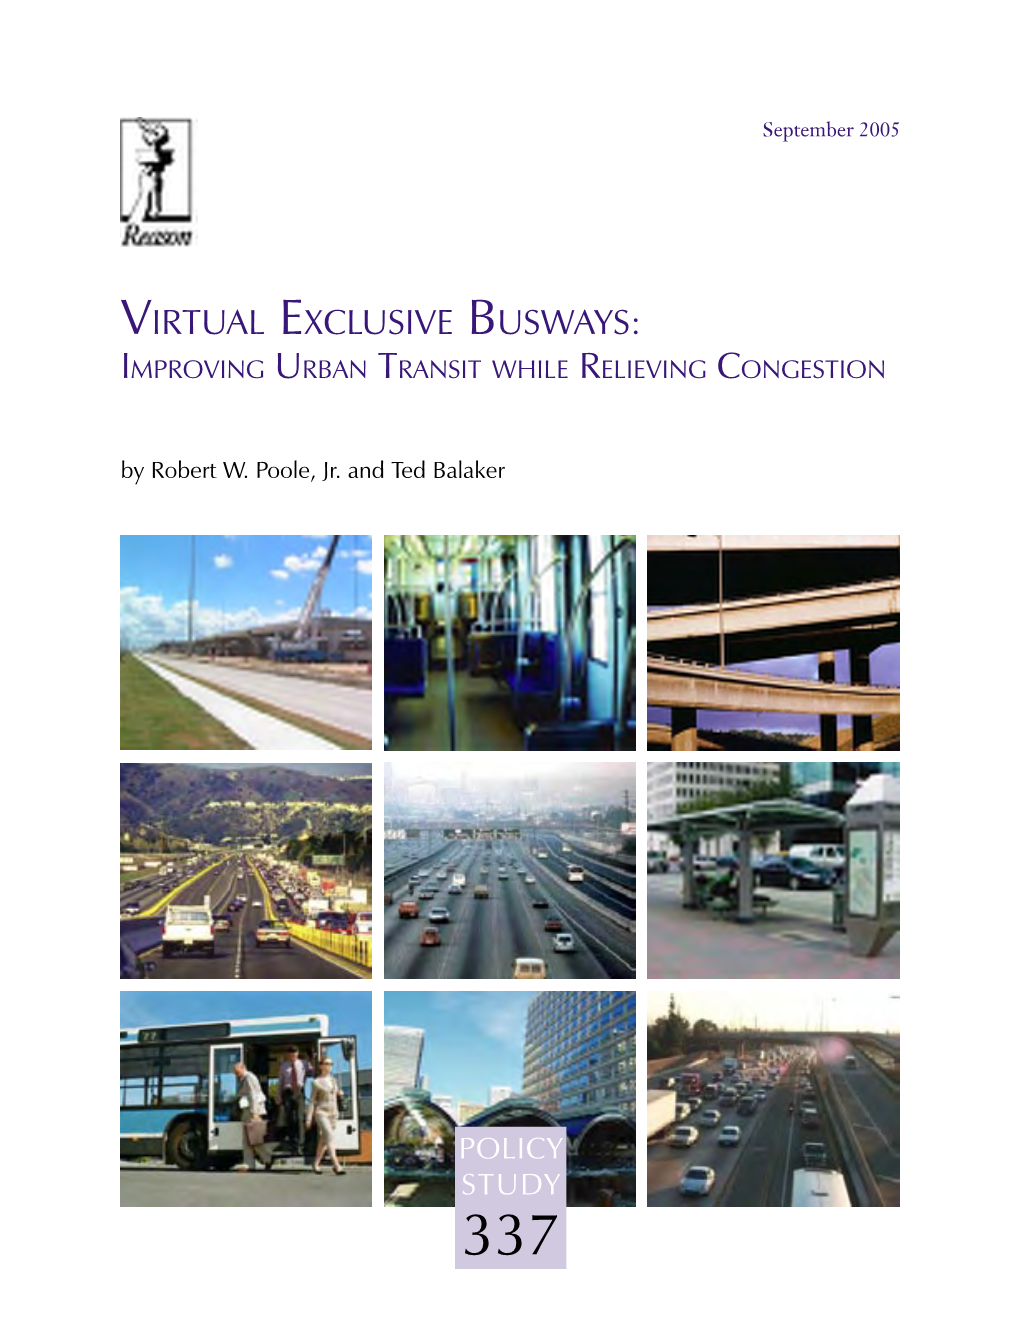 Virtual Exclusive Busways: Improving Urban Transit While Relieving Congestion